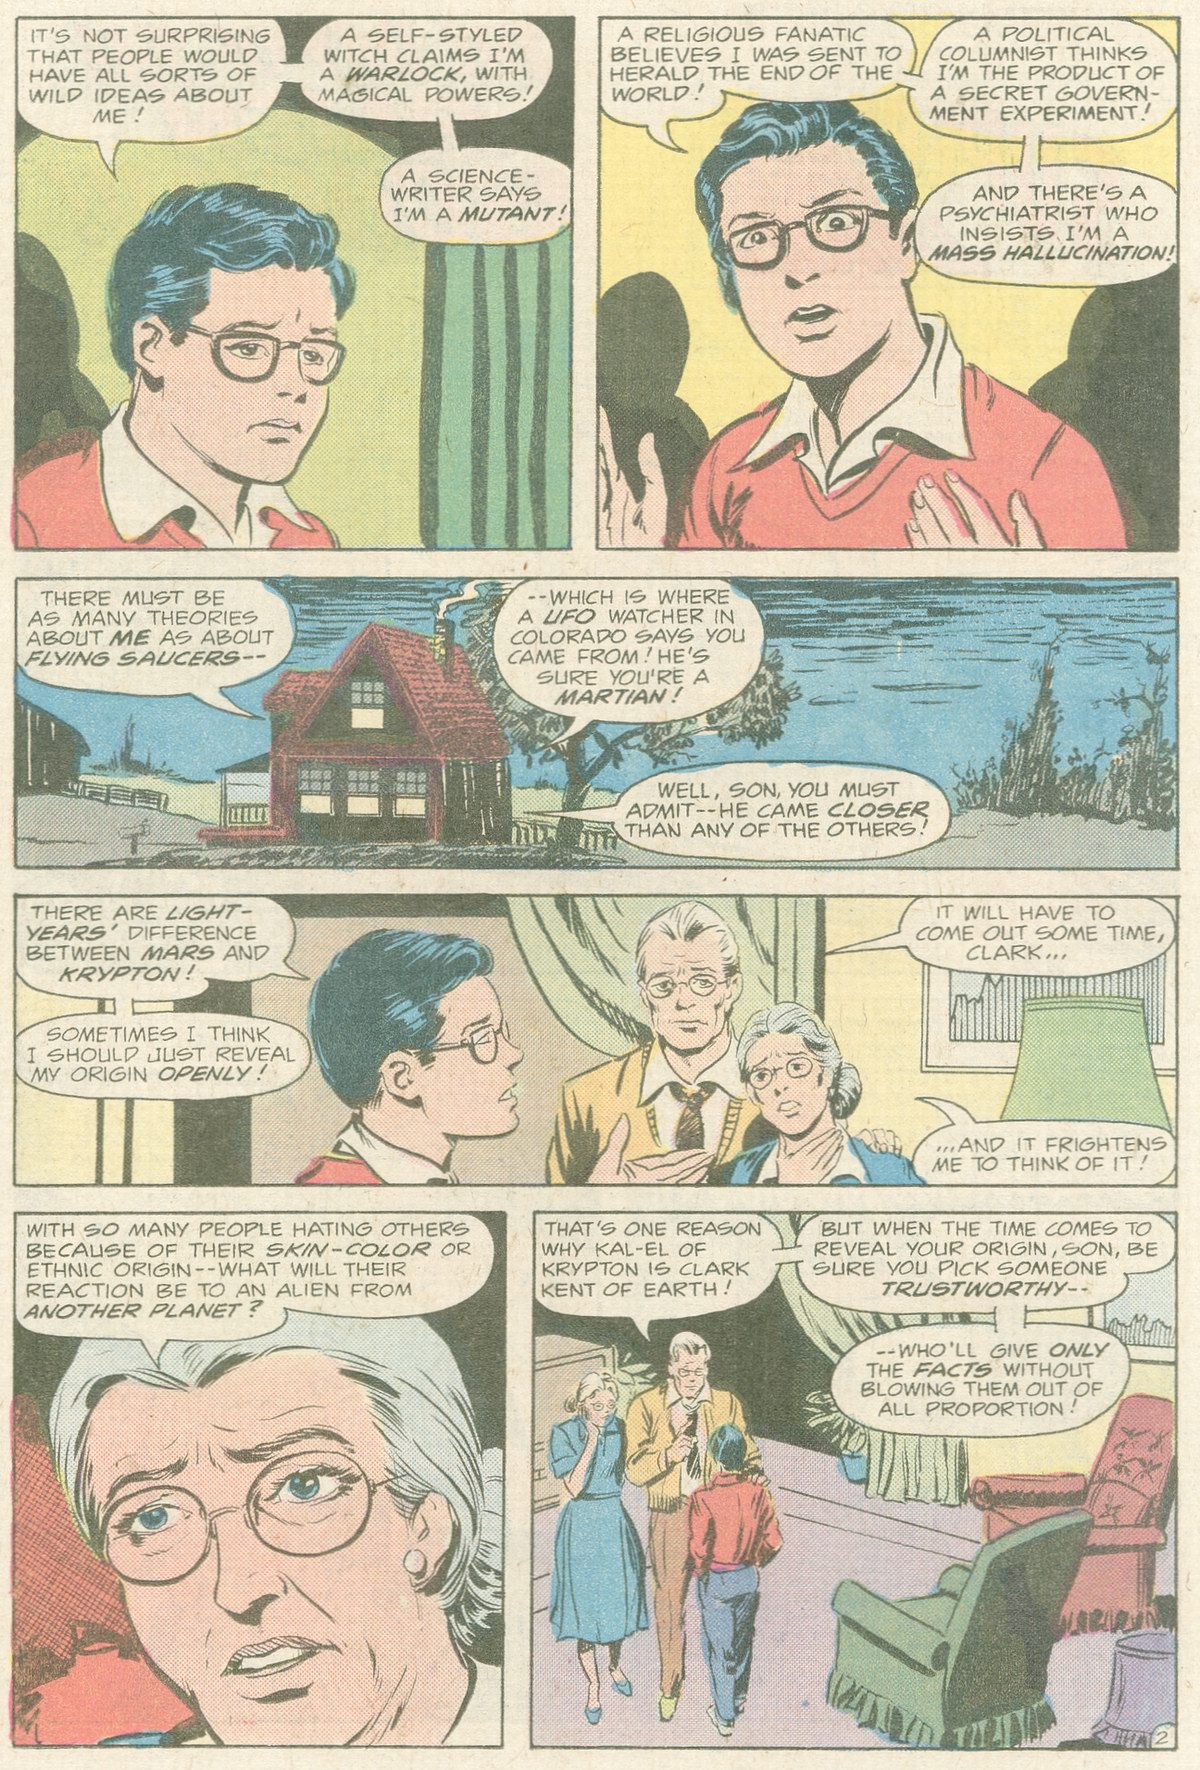 The New Adventures of Superboy 12 Page 19